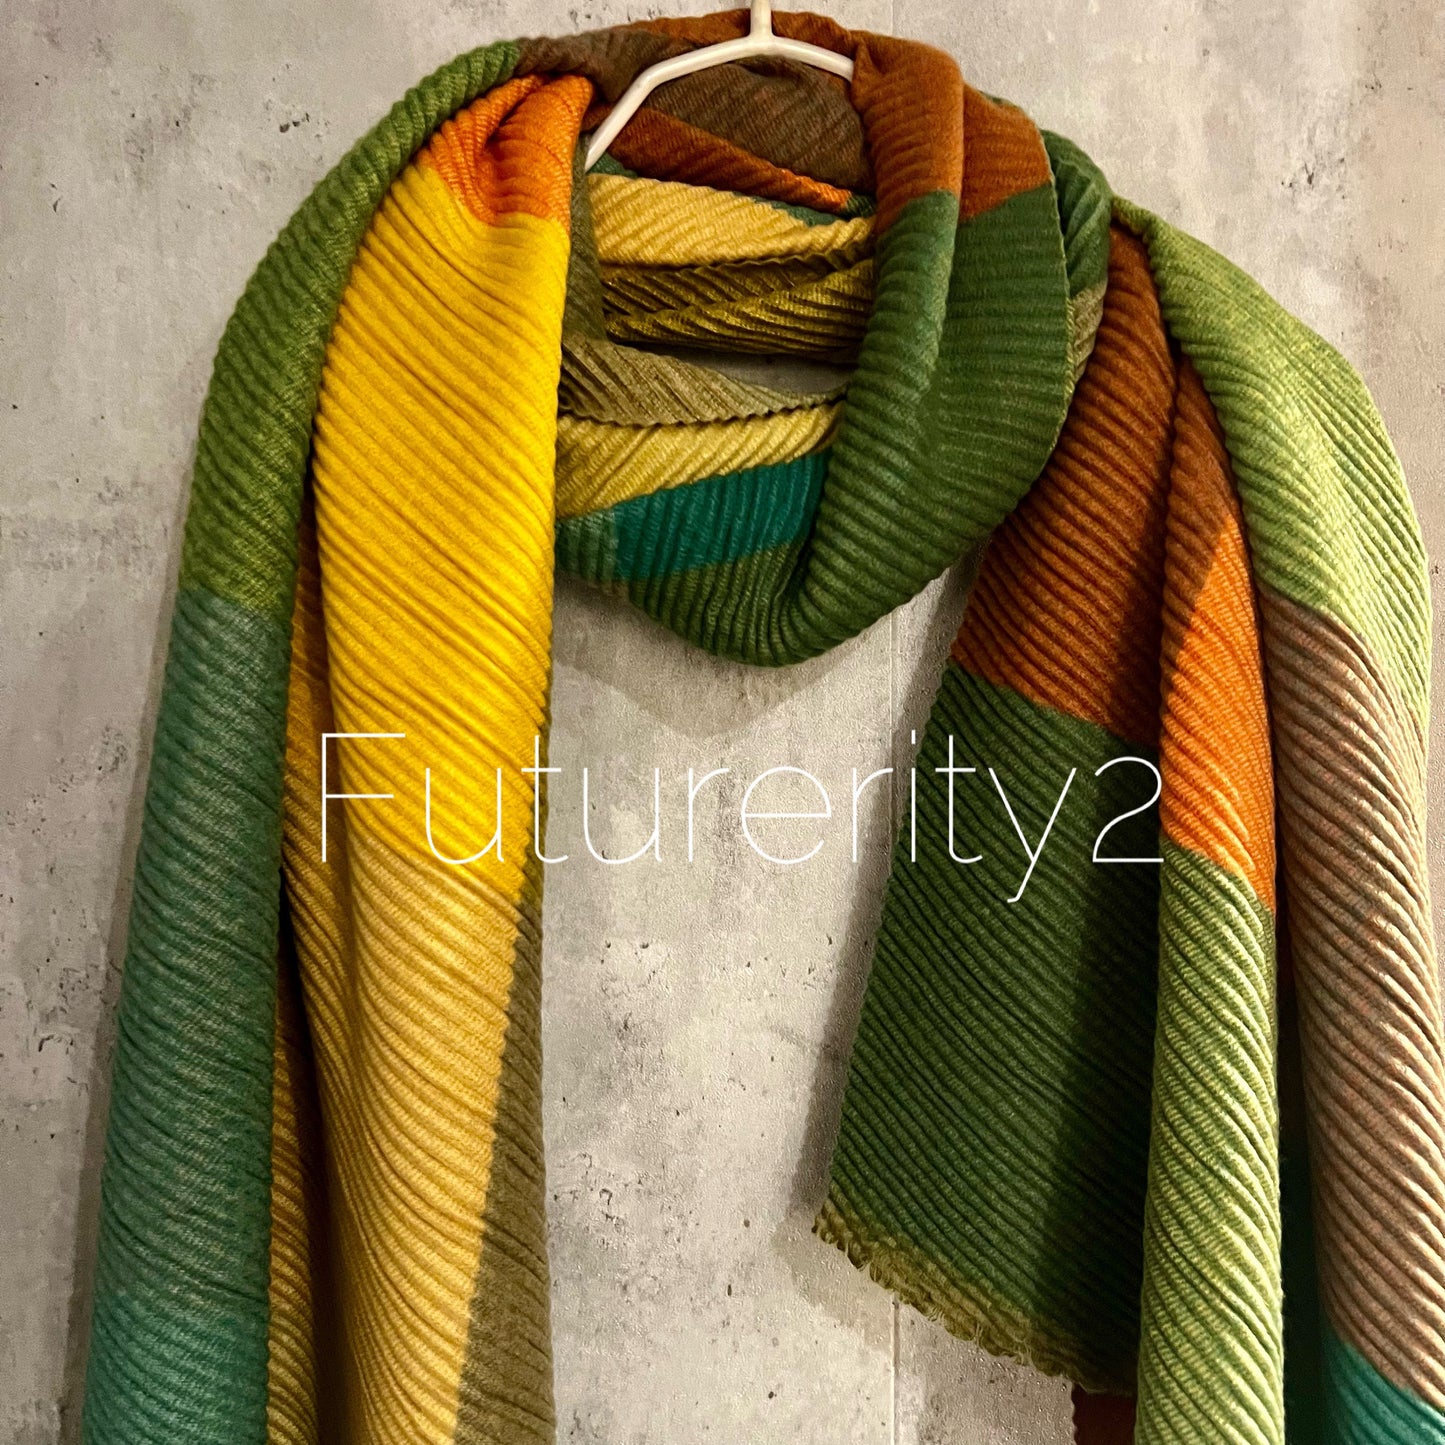 Block Pattern Green Orange Yellow Cashmere Blend Scarf/Autumn Winter Scarf/Gifts For Mum/Gifts For Her Birthday Christmas/Scarf Women